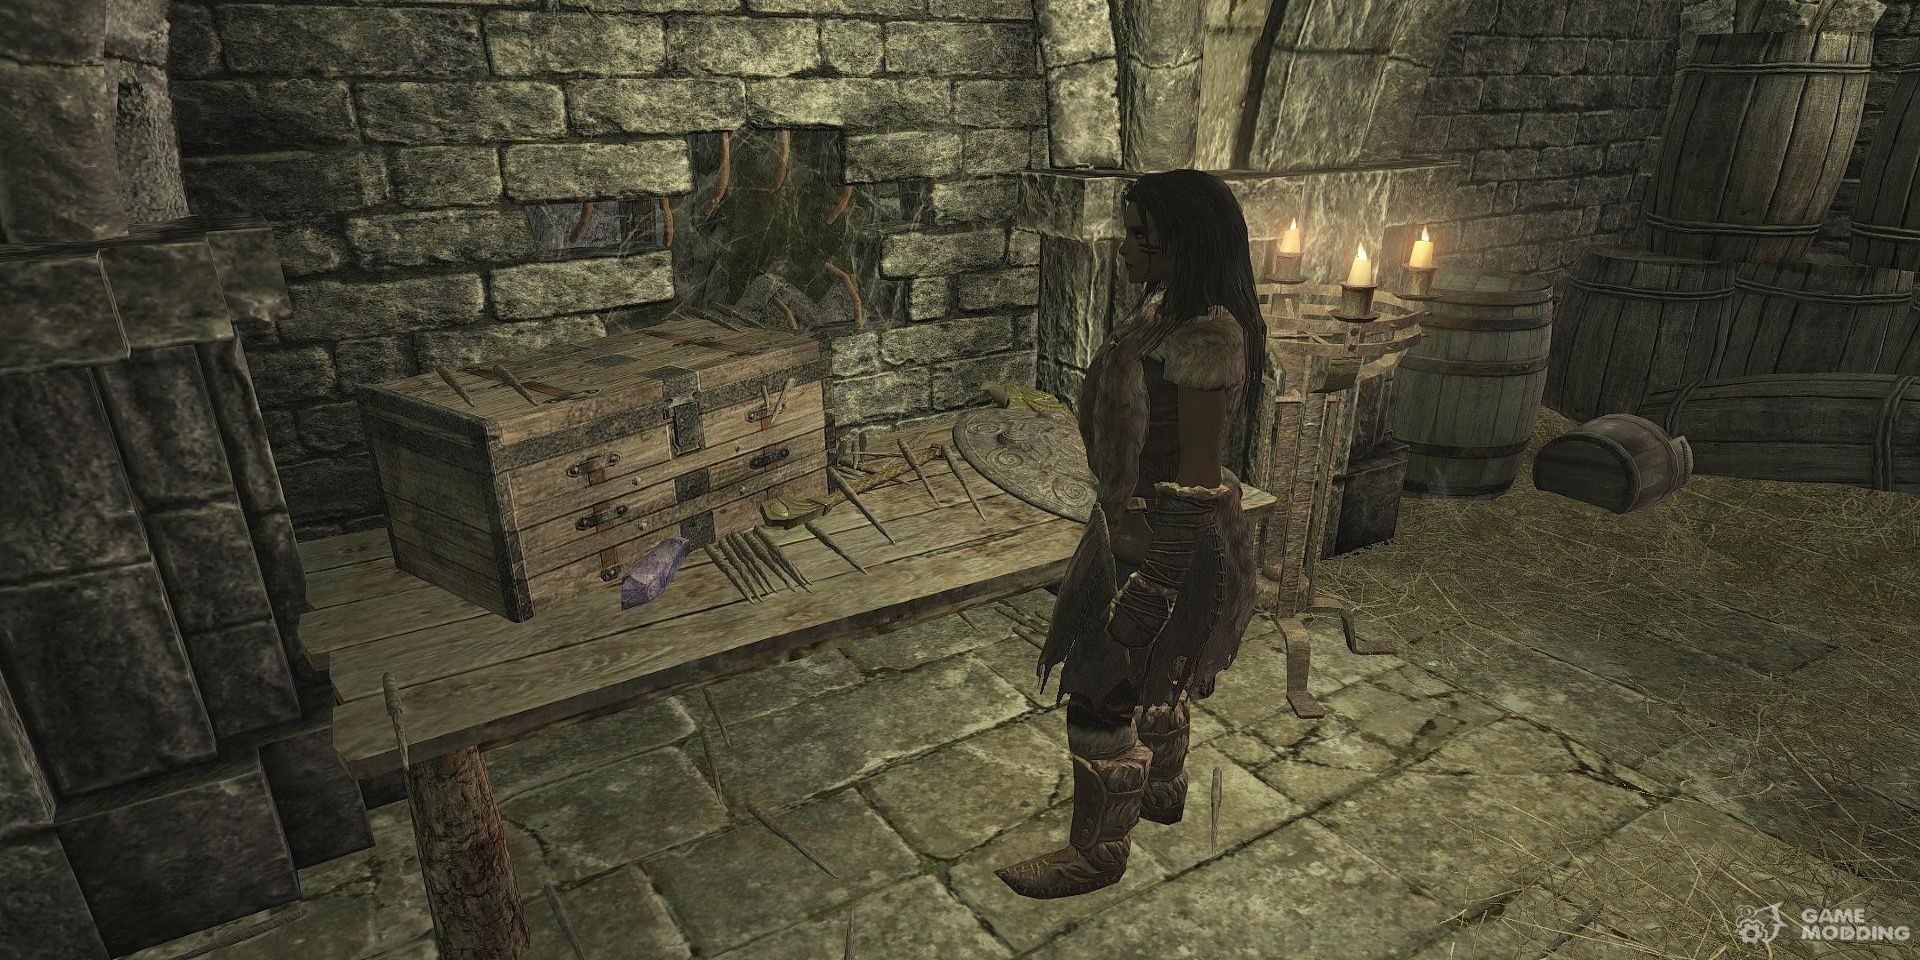 A player finding the Shiv in The Elder Scrolls V: Skyrim.